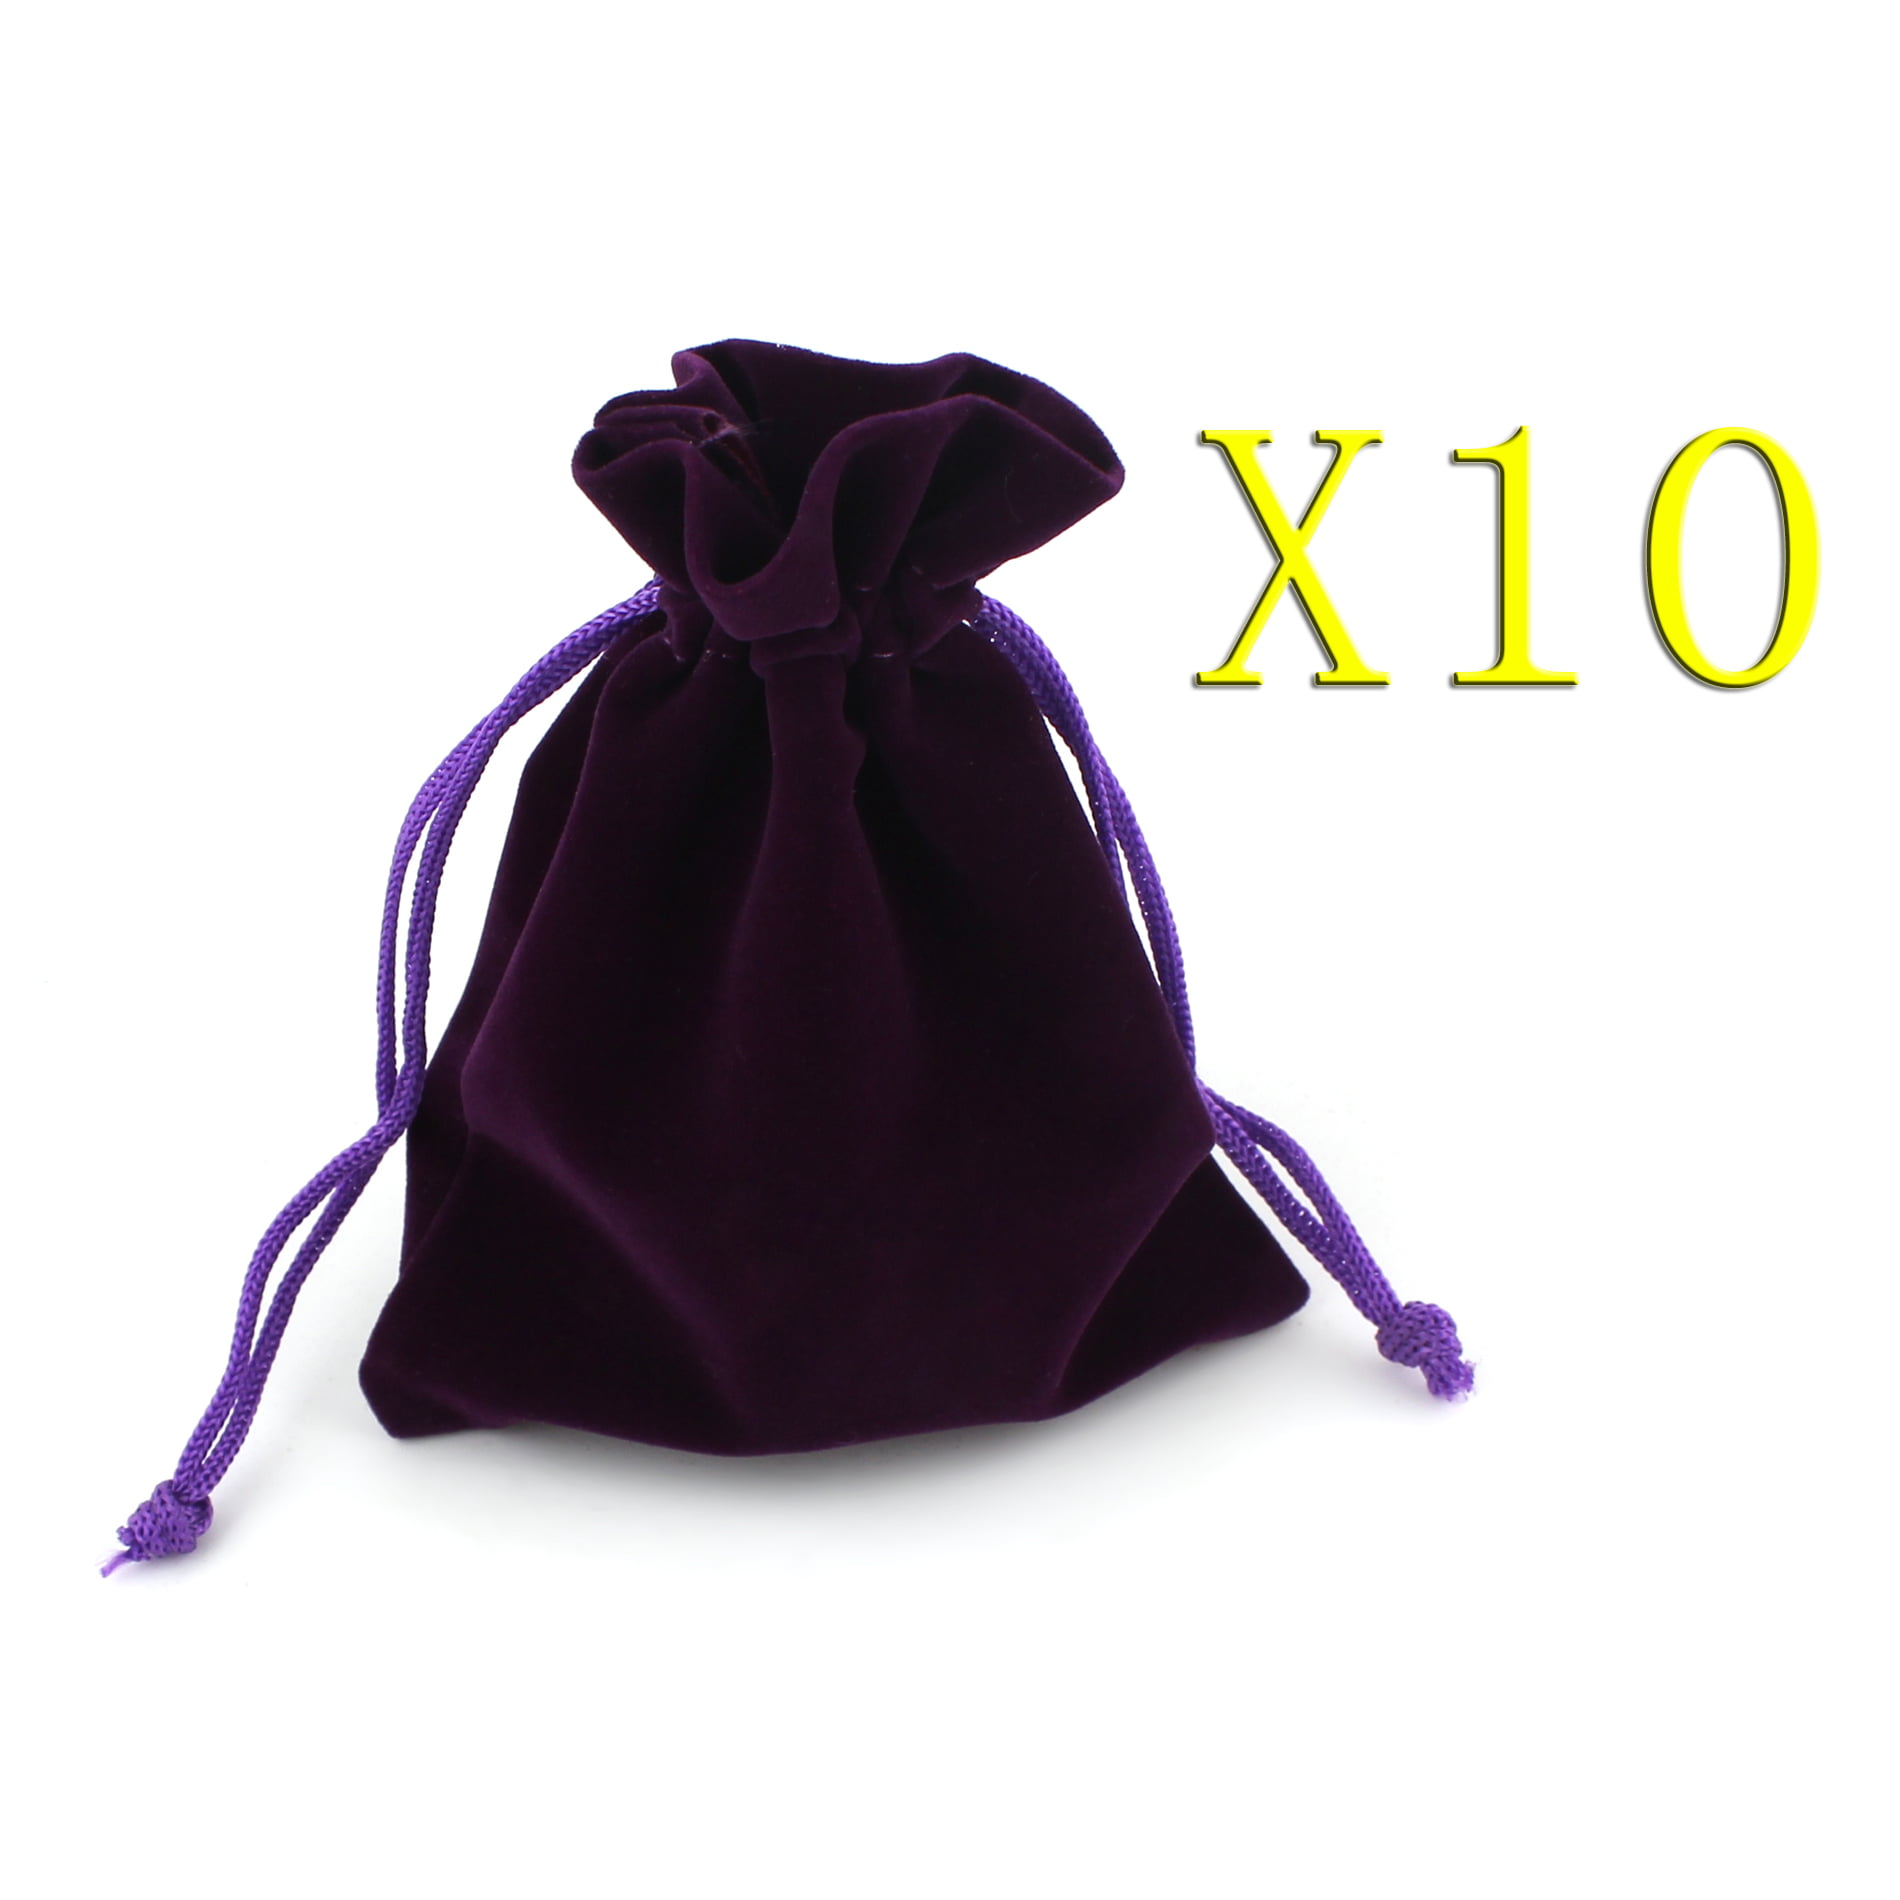 100 Small Gift Bag Velvet Fabric Jewelry Storage Bag Gift Storage Packaging Bag 